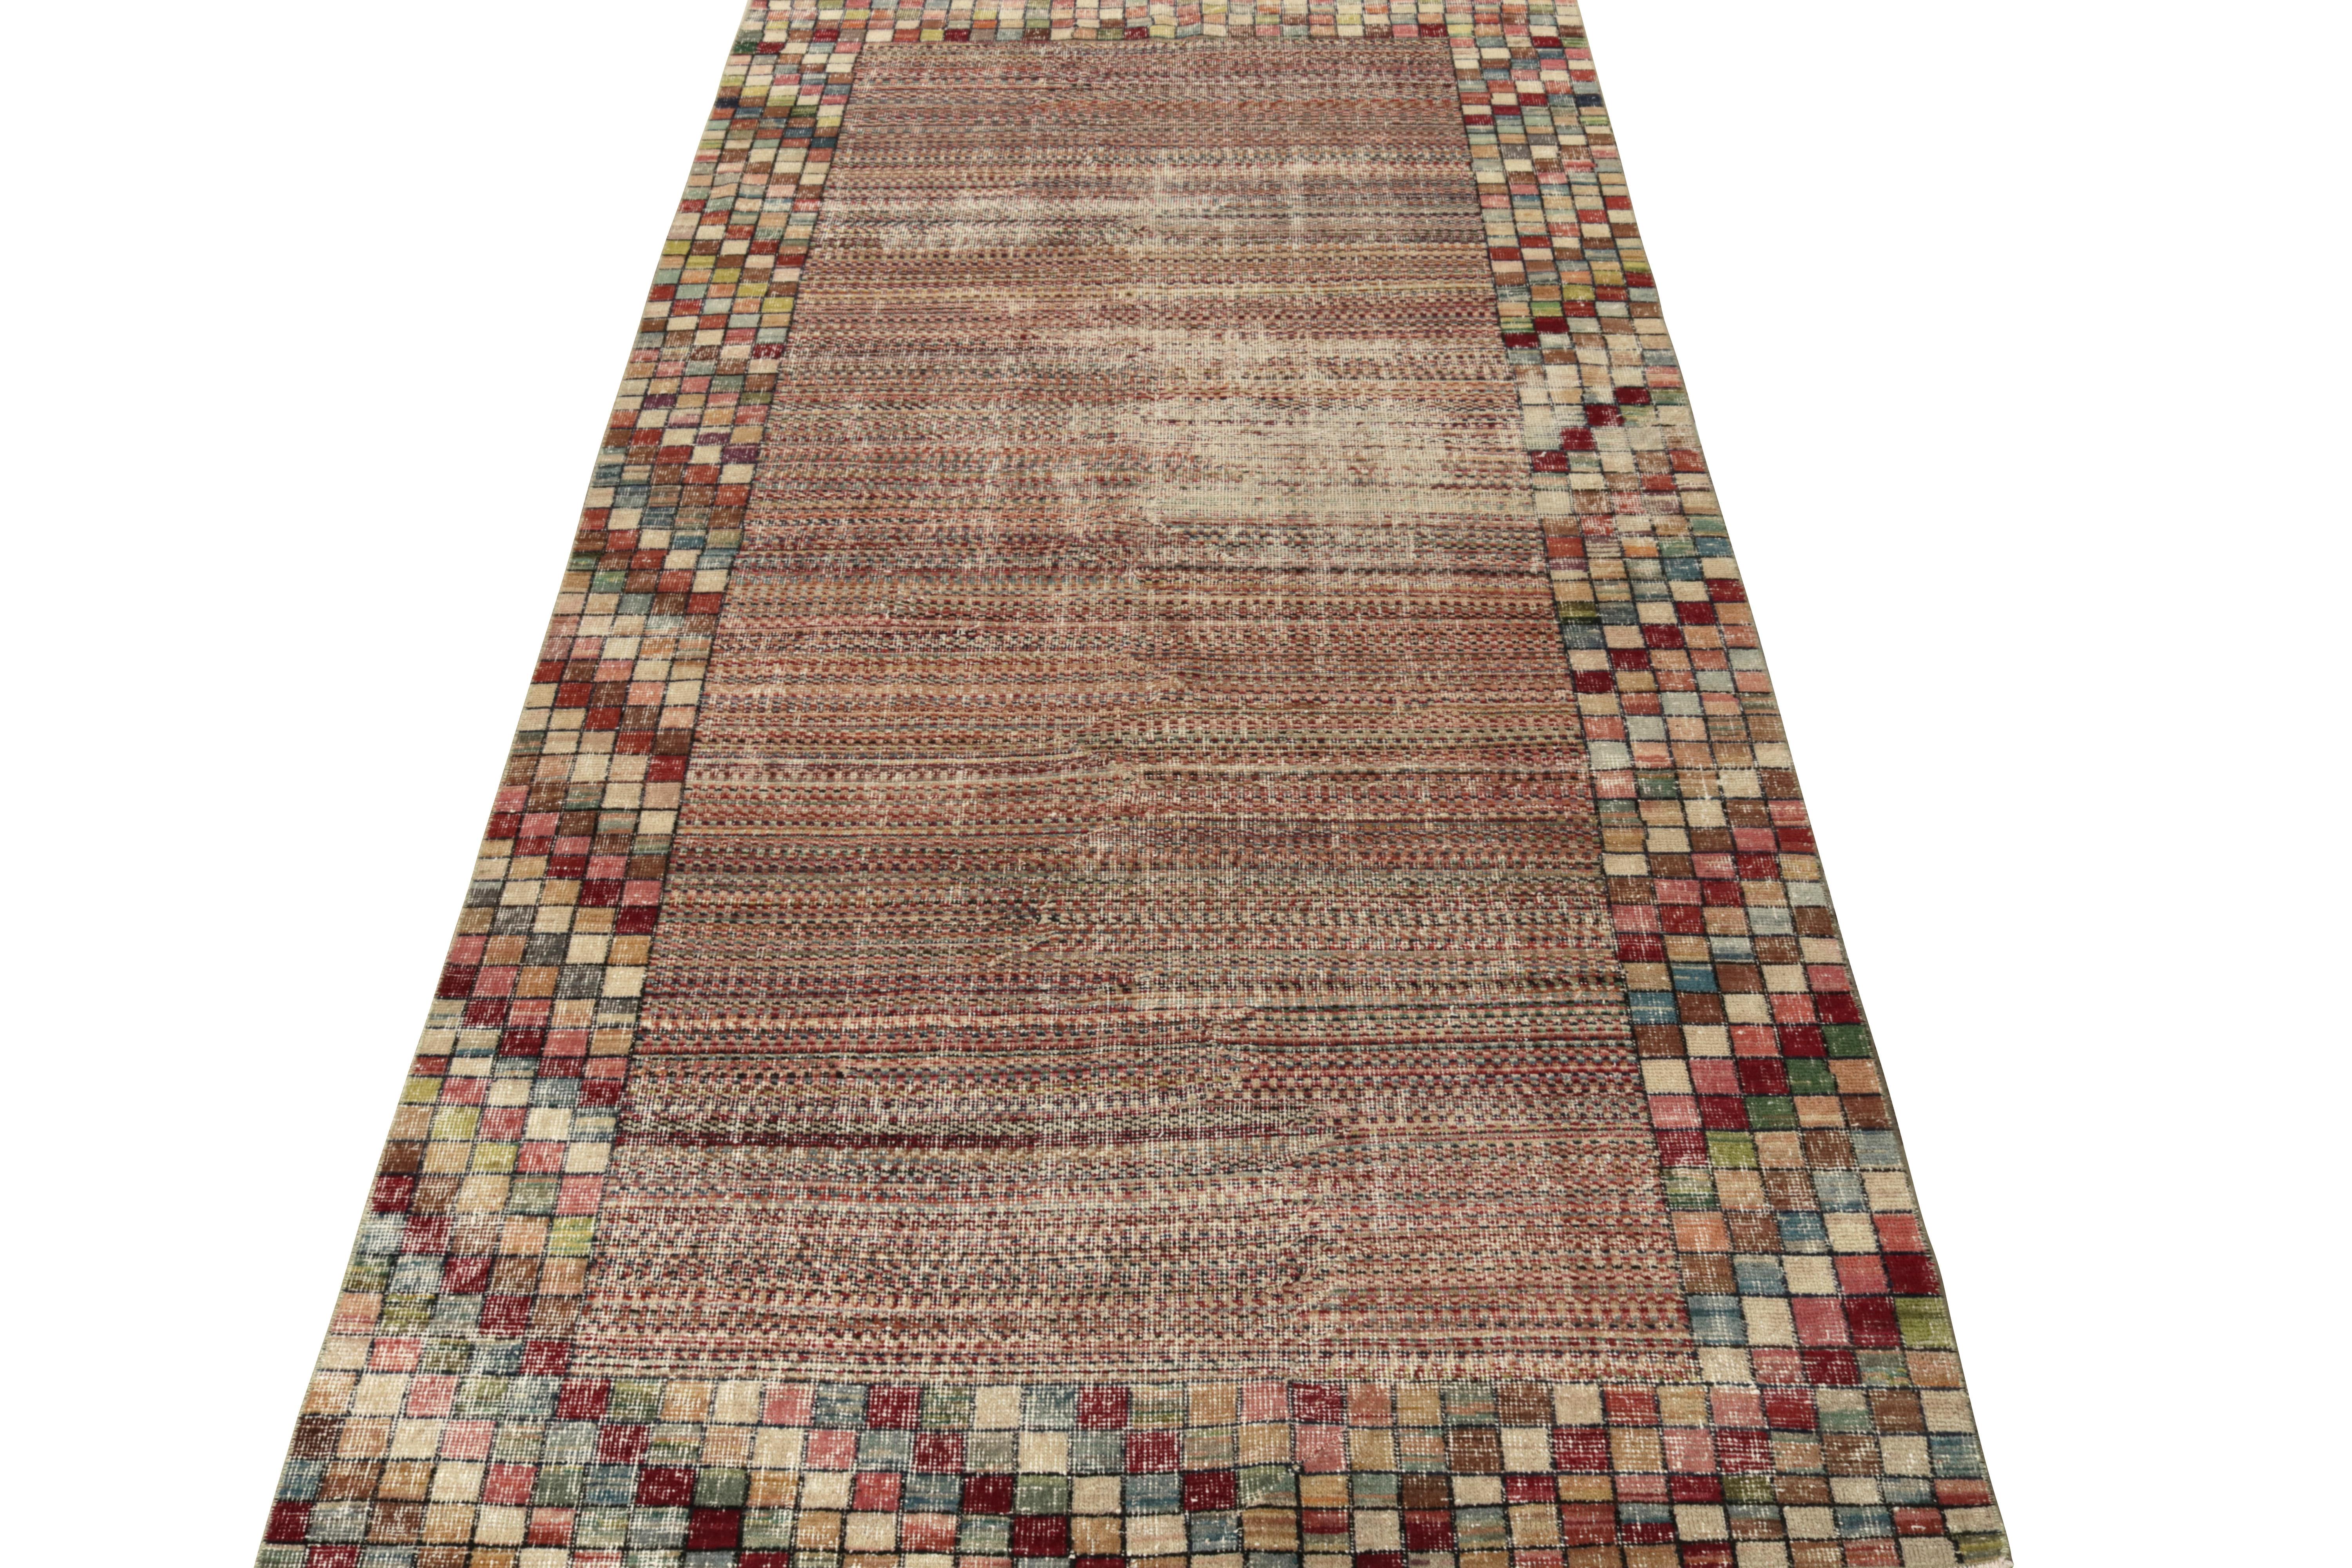 An exemplary vintage Art Deco rug originating from Turkey circa 1960-1970, joining our Mid-Century Pasha Collection connoting the works of a venerated Turkish artist. The 4x9 rug prevails on a comforting beige cocooned in a multicolor geometric